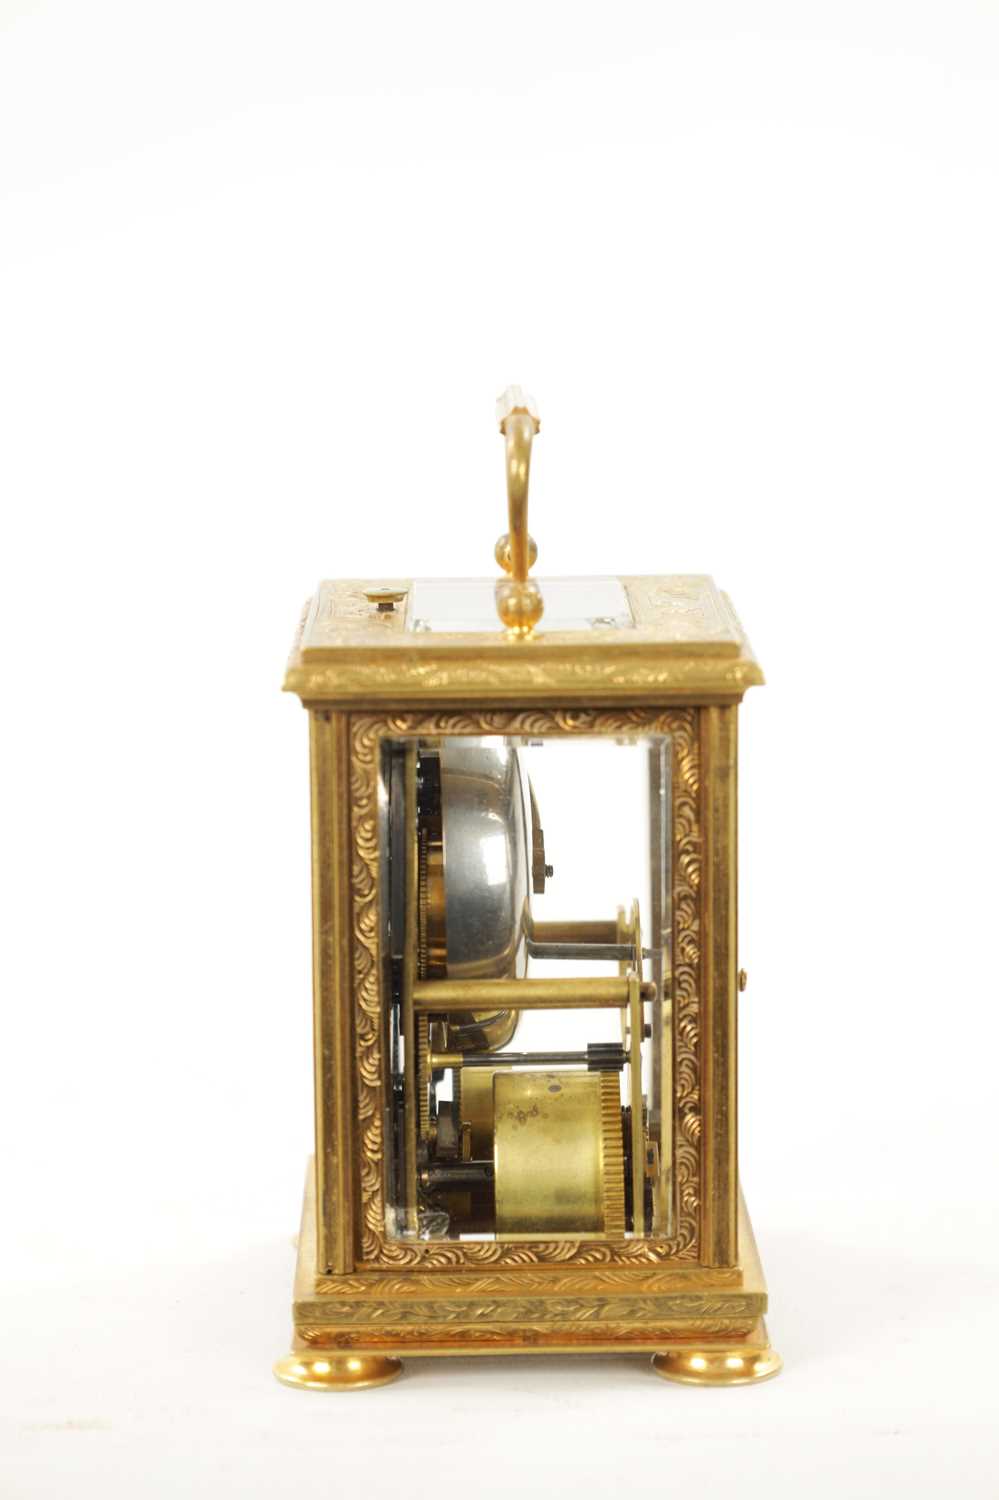 LE ROY ET FILS, PALAIS ROYAL. AN UNUSUAL LATE 19TH CENTURY FRENCH CARRIAGE CLOCK - Image 3 of 7